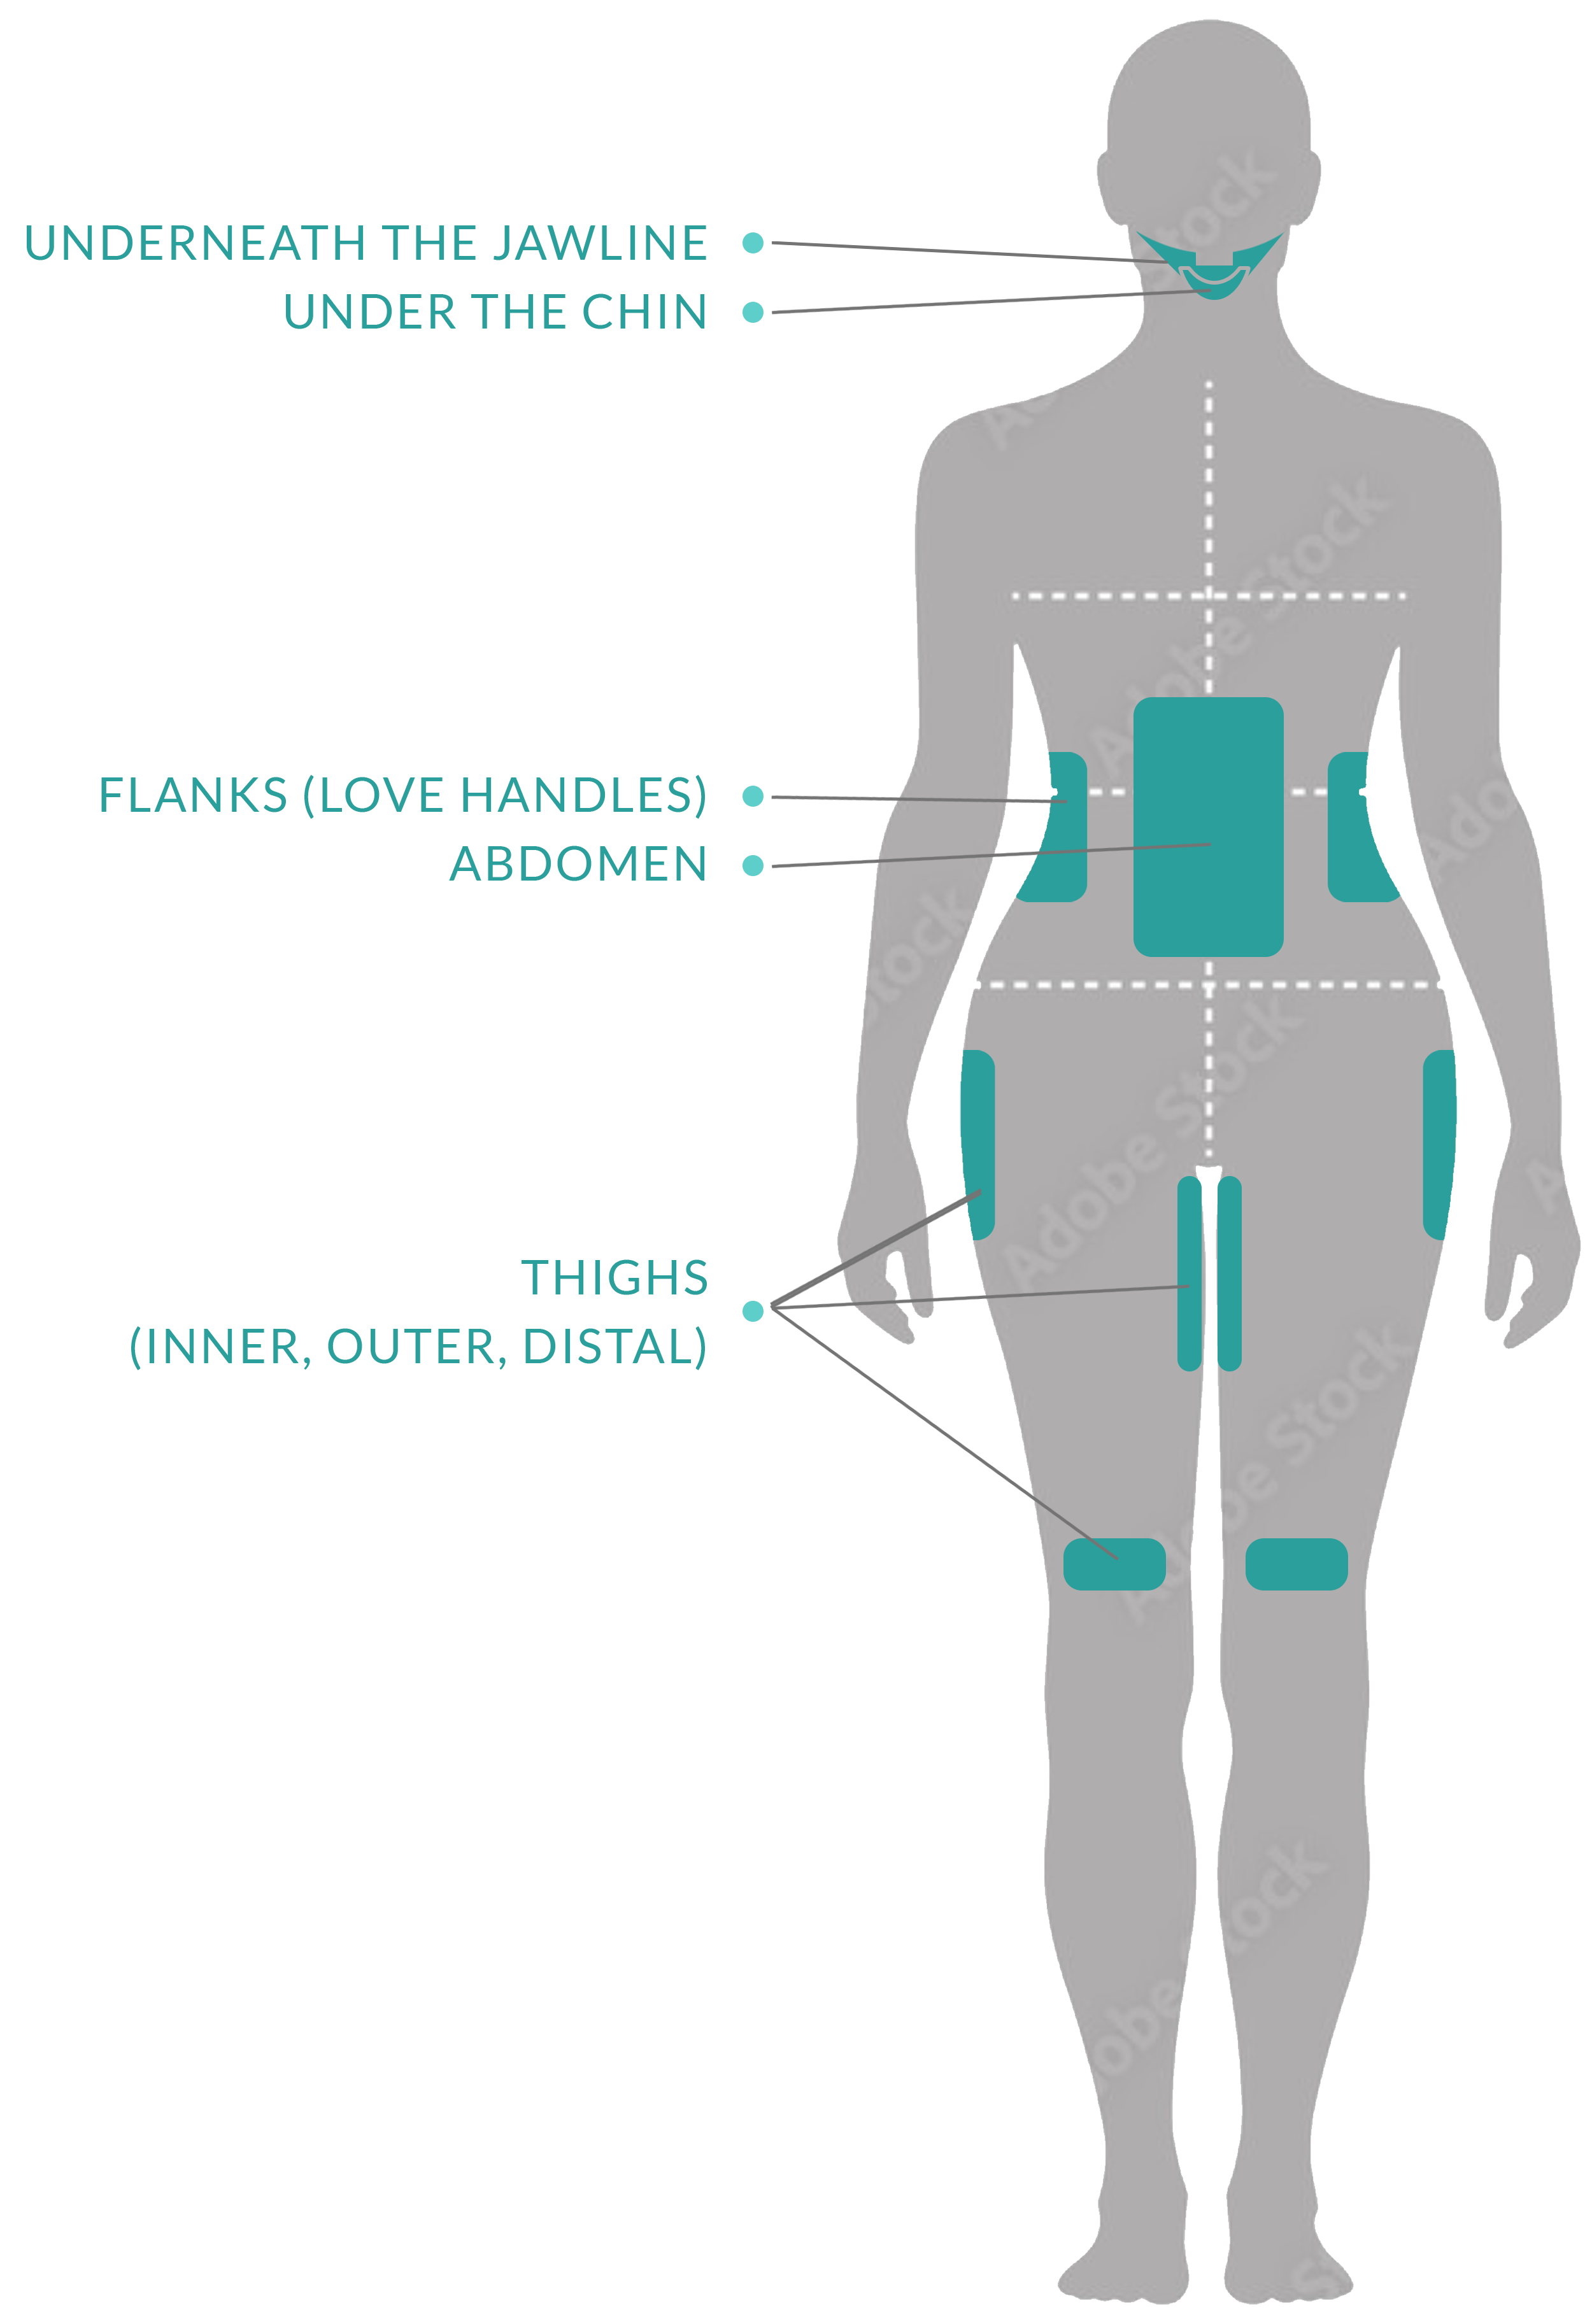 Diagram of female back showing body zones targeted by CoolSculpting: Under the Jawline, Under Chin, Flank (Love Handles), Abdomen, Inner Thighs, Outer Thighs, and Distal Thighs